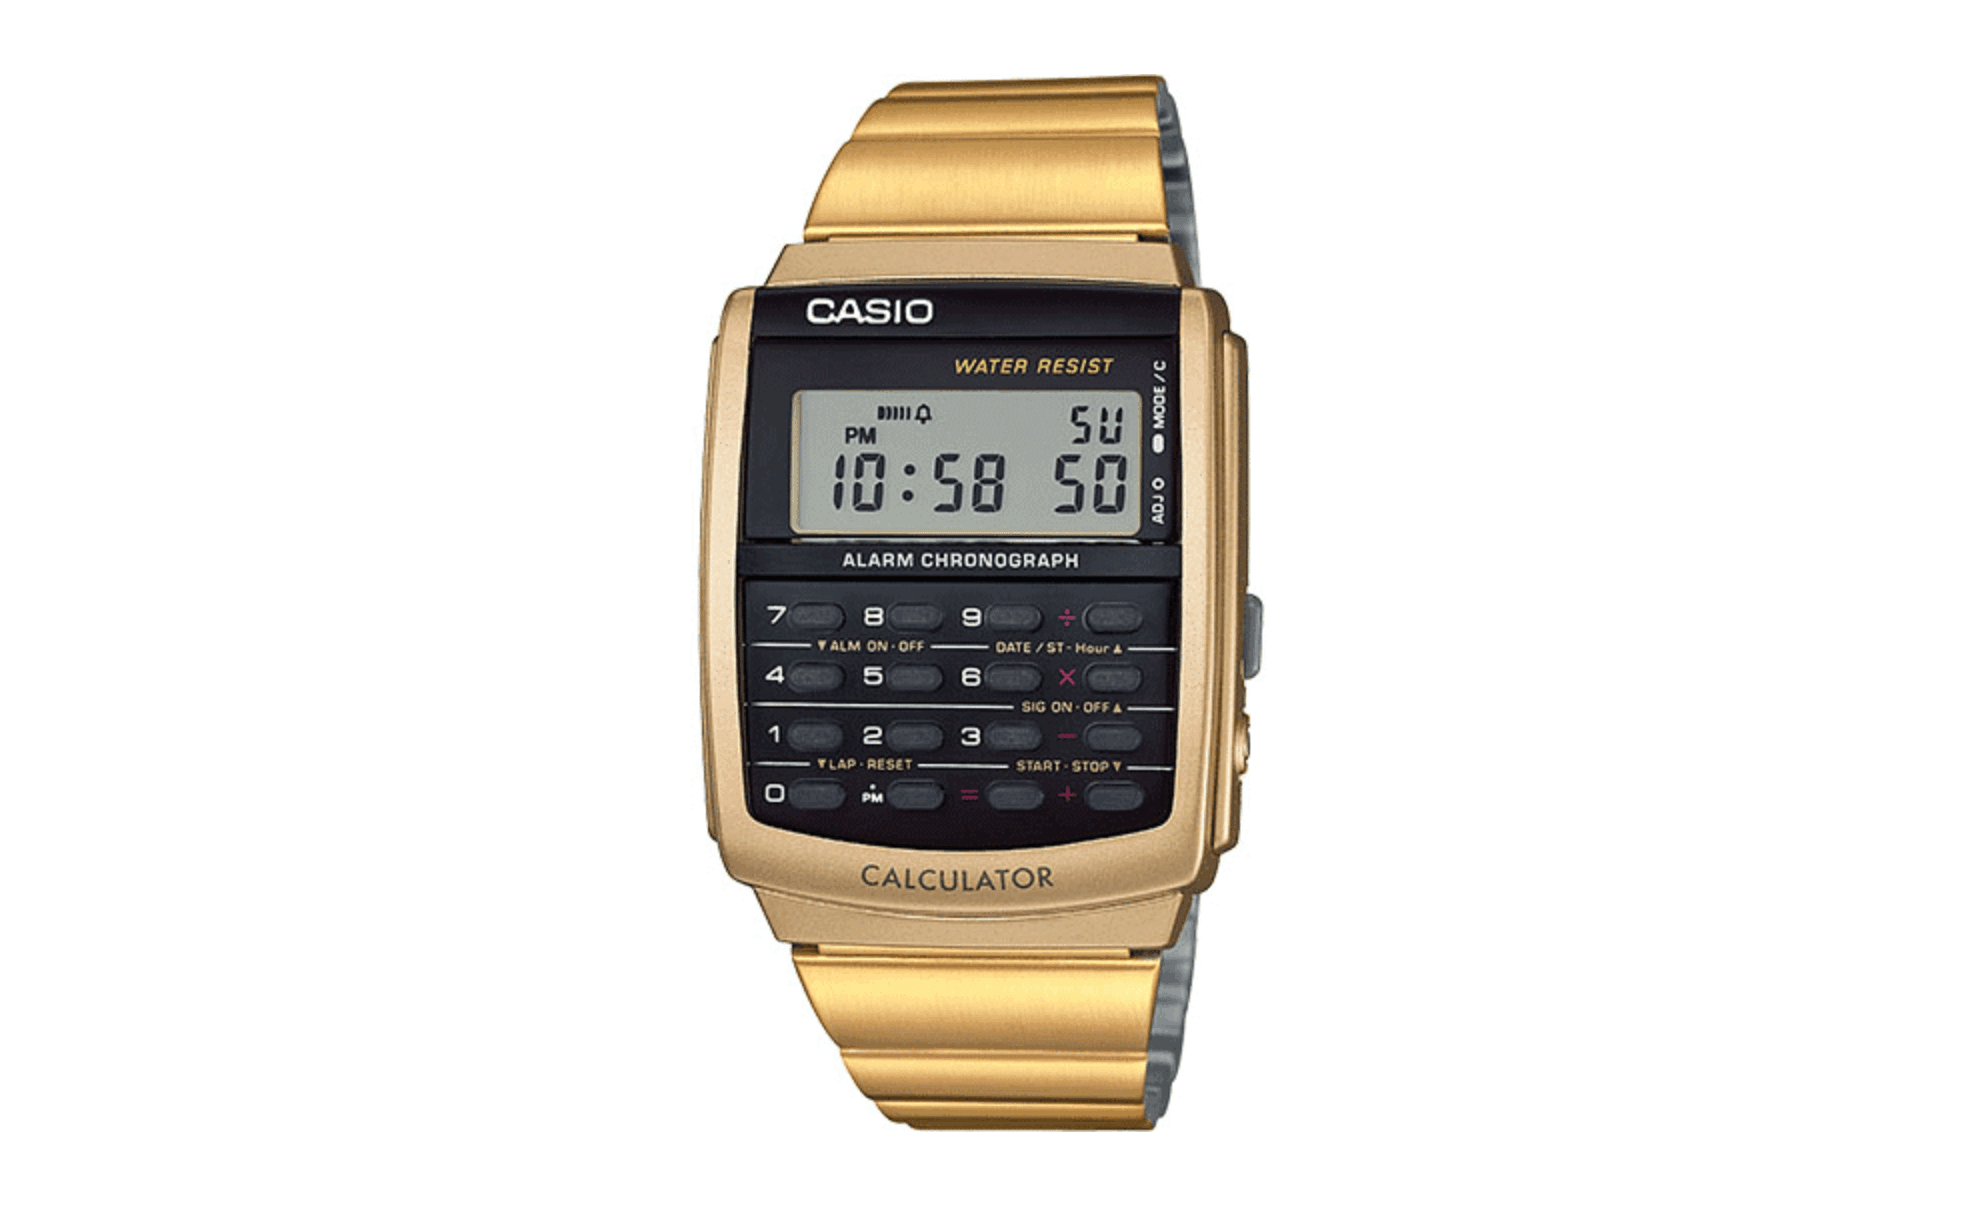 Casio Databank Calculator Watch Geek It Out Old School Style